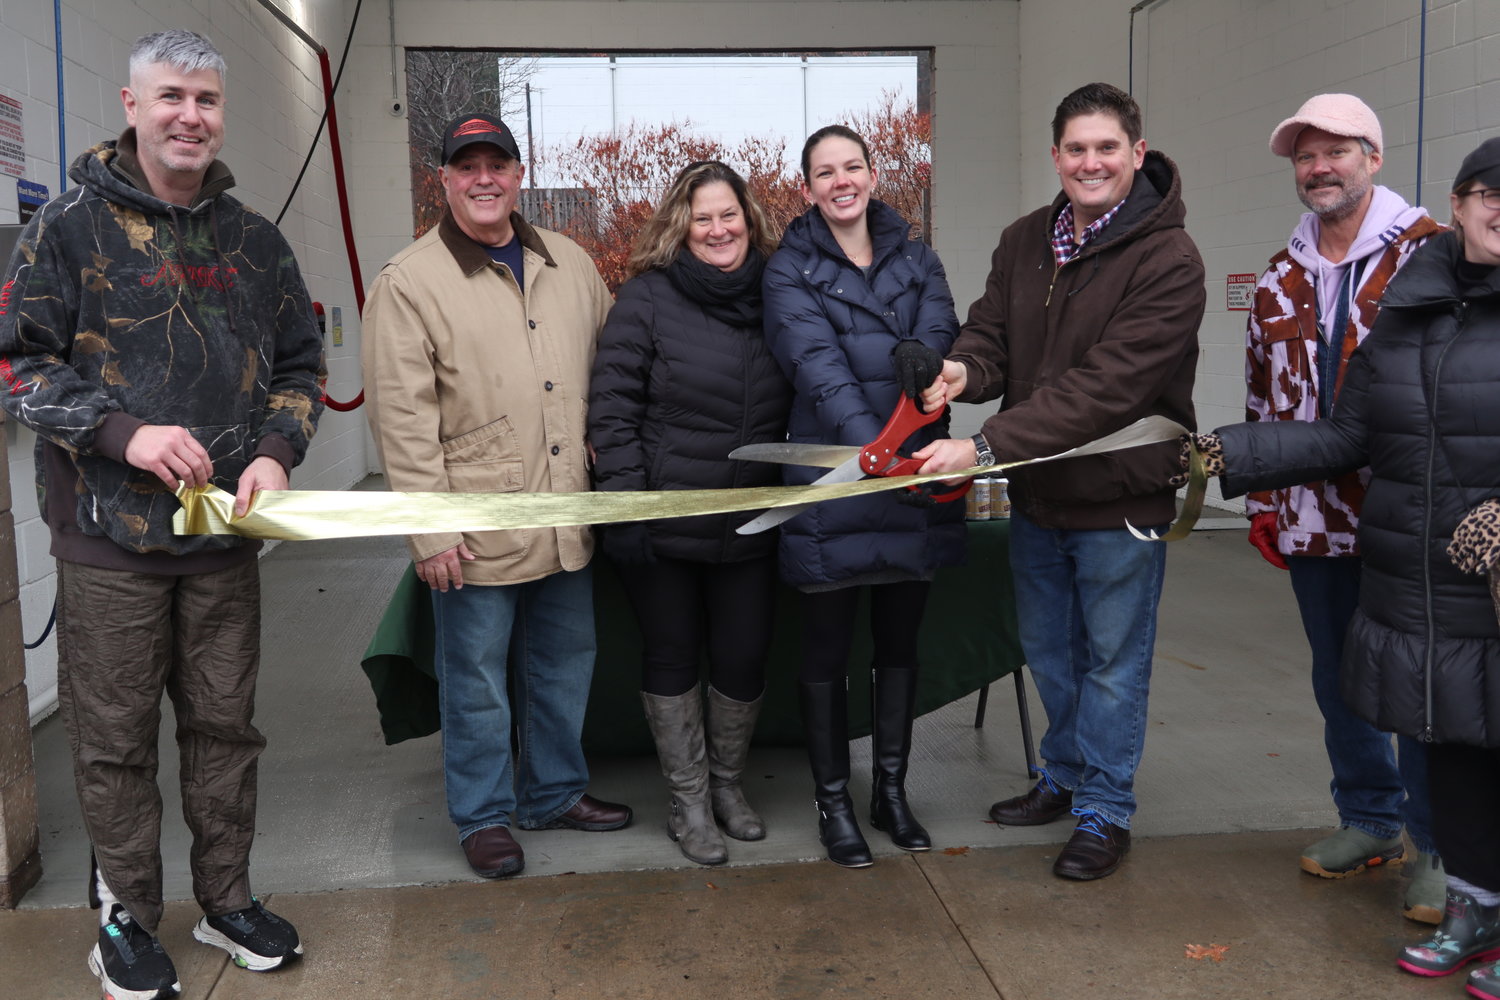 Greater Barryville Chamber of Commerce President John Pizzolato, left, holds the ceremonial ribbon as Matt Sallusto, with scissors prepares to cut the ribbon. To the right of Matt is his wife Elizabeth, mother Liz and father Jim.